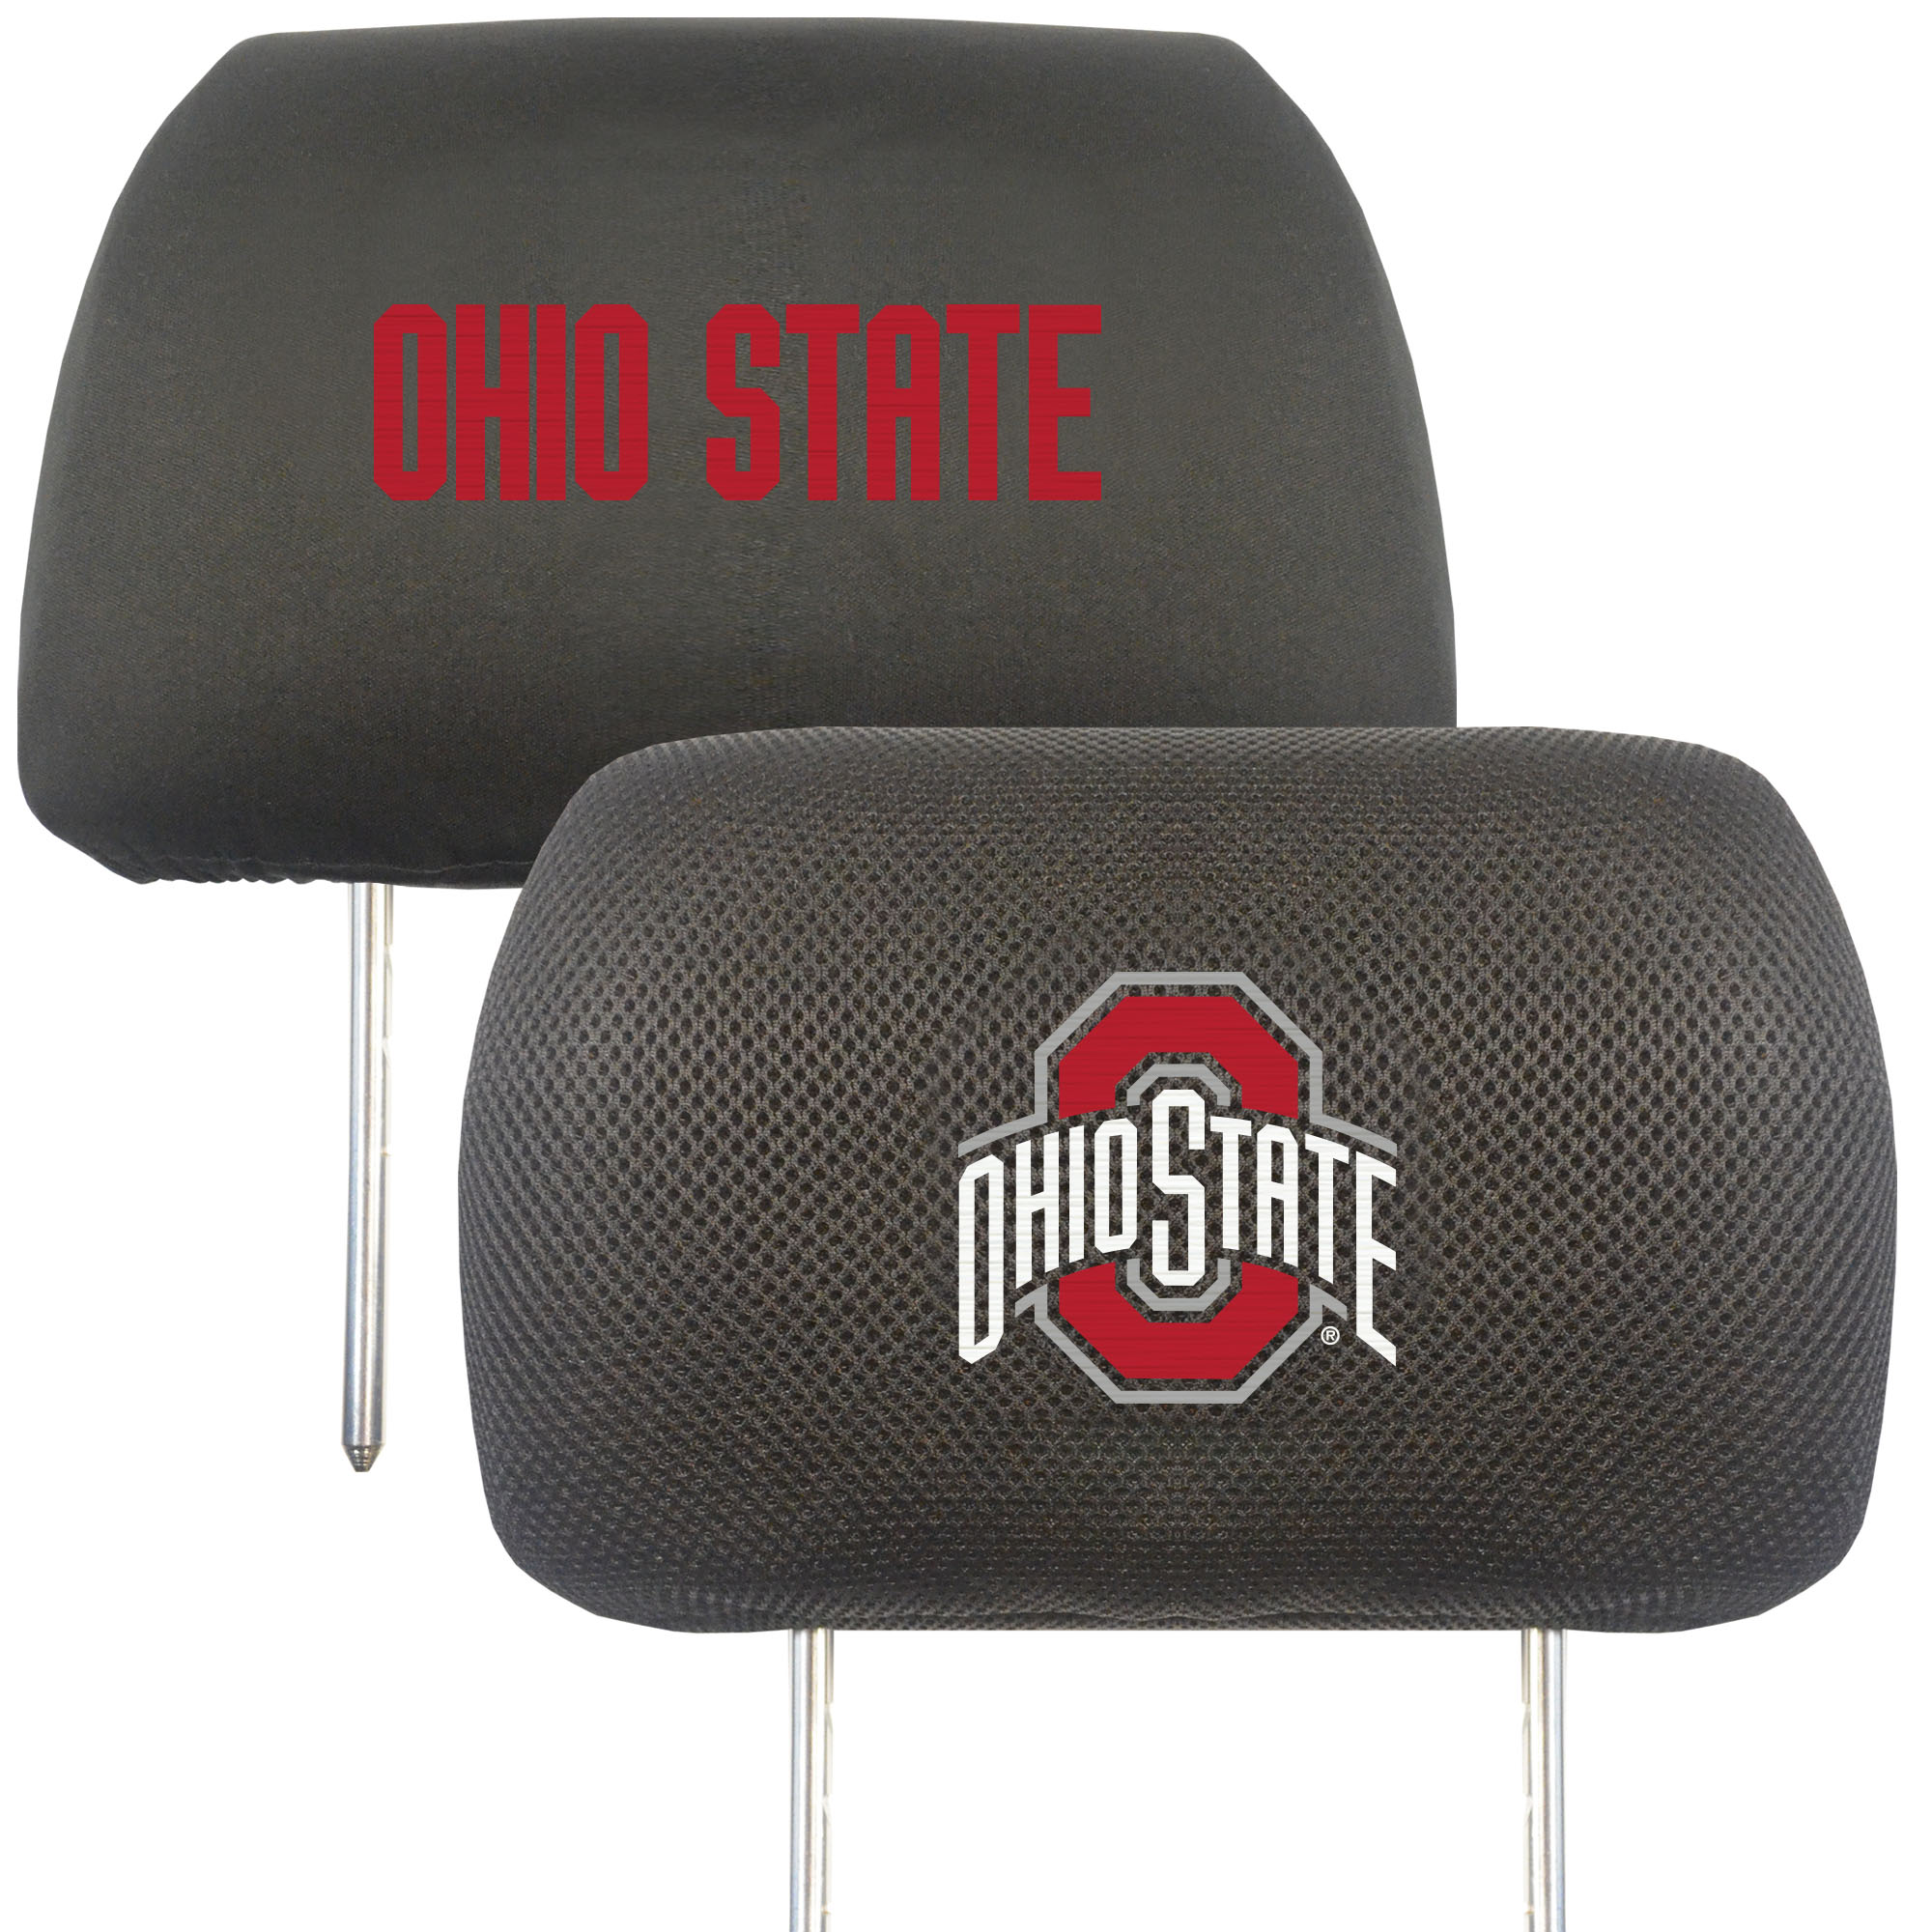 Ohio State Buckeyes Headrest Covers FanMats